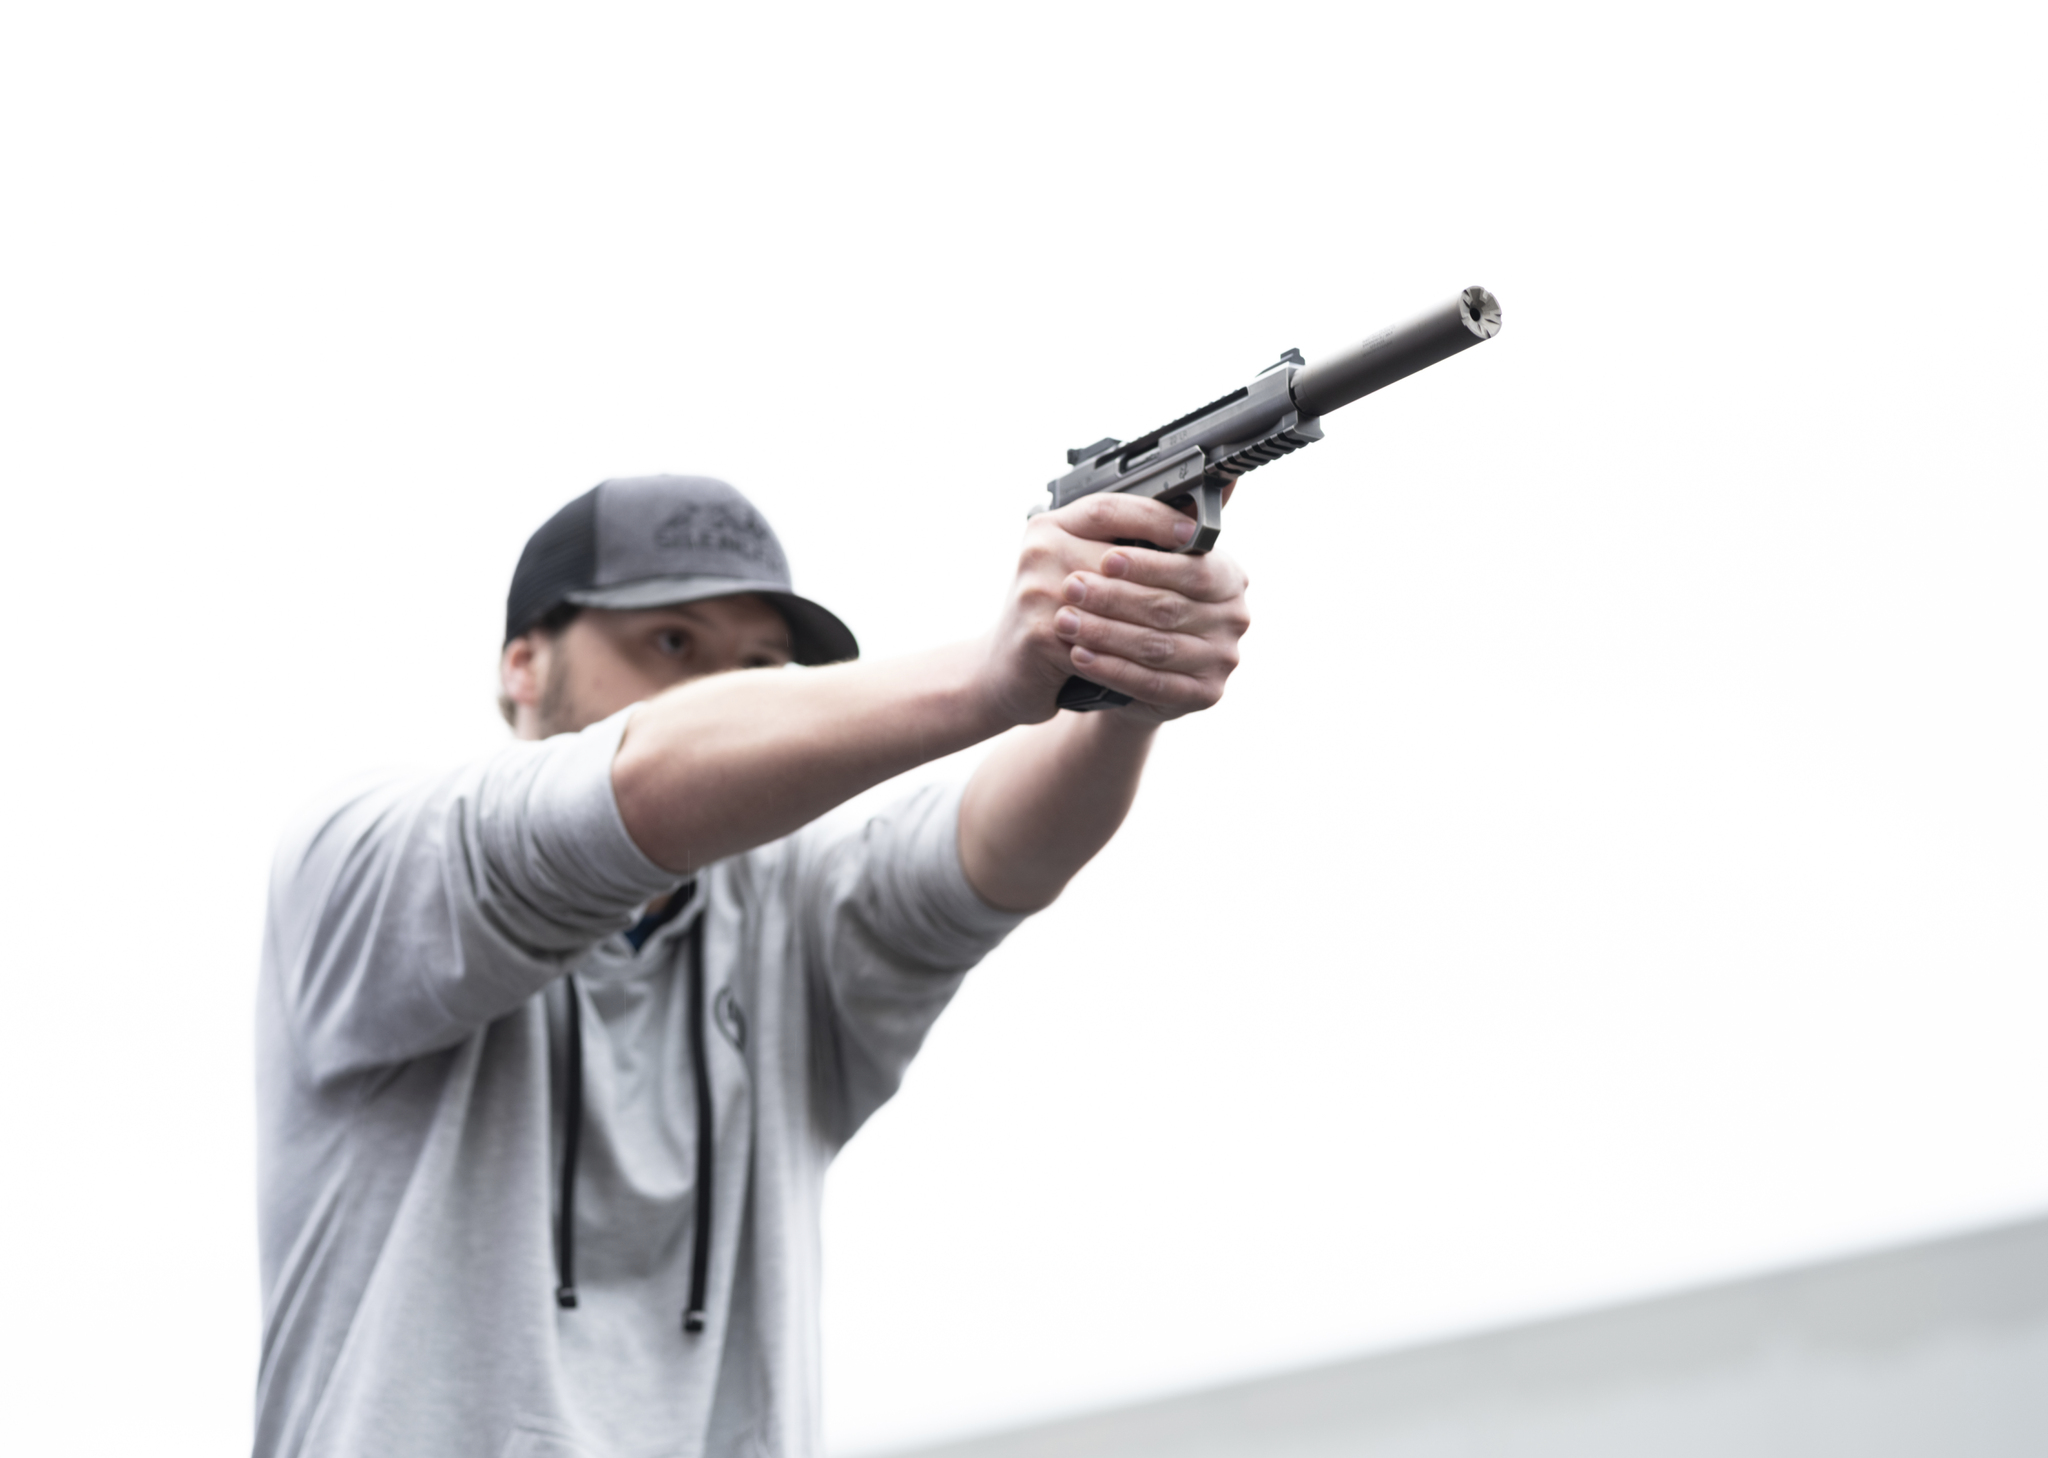 SilencerCo Celebrates 15 Years with the New Sparrow-Ti